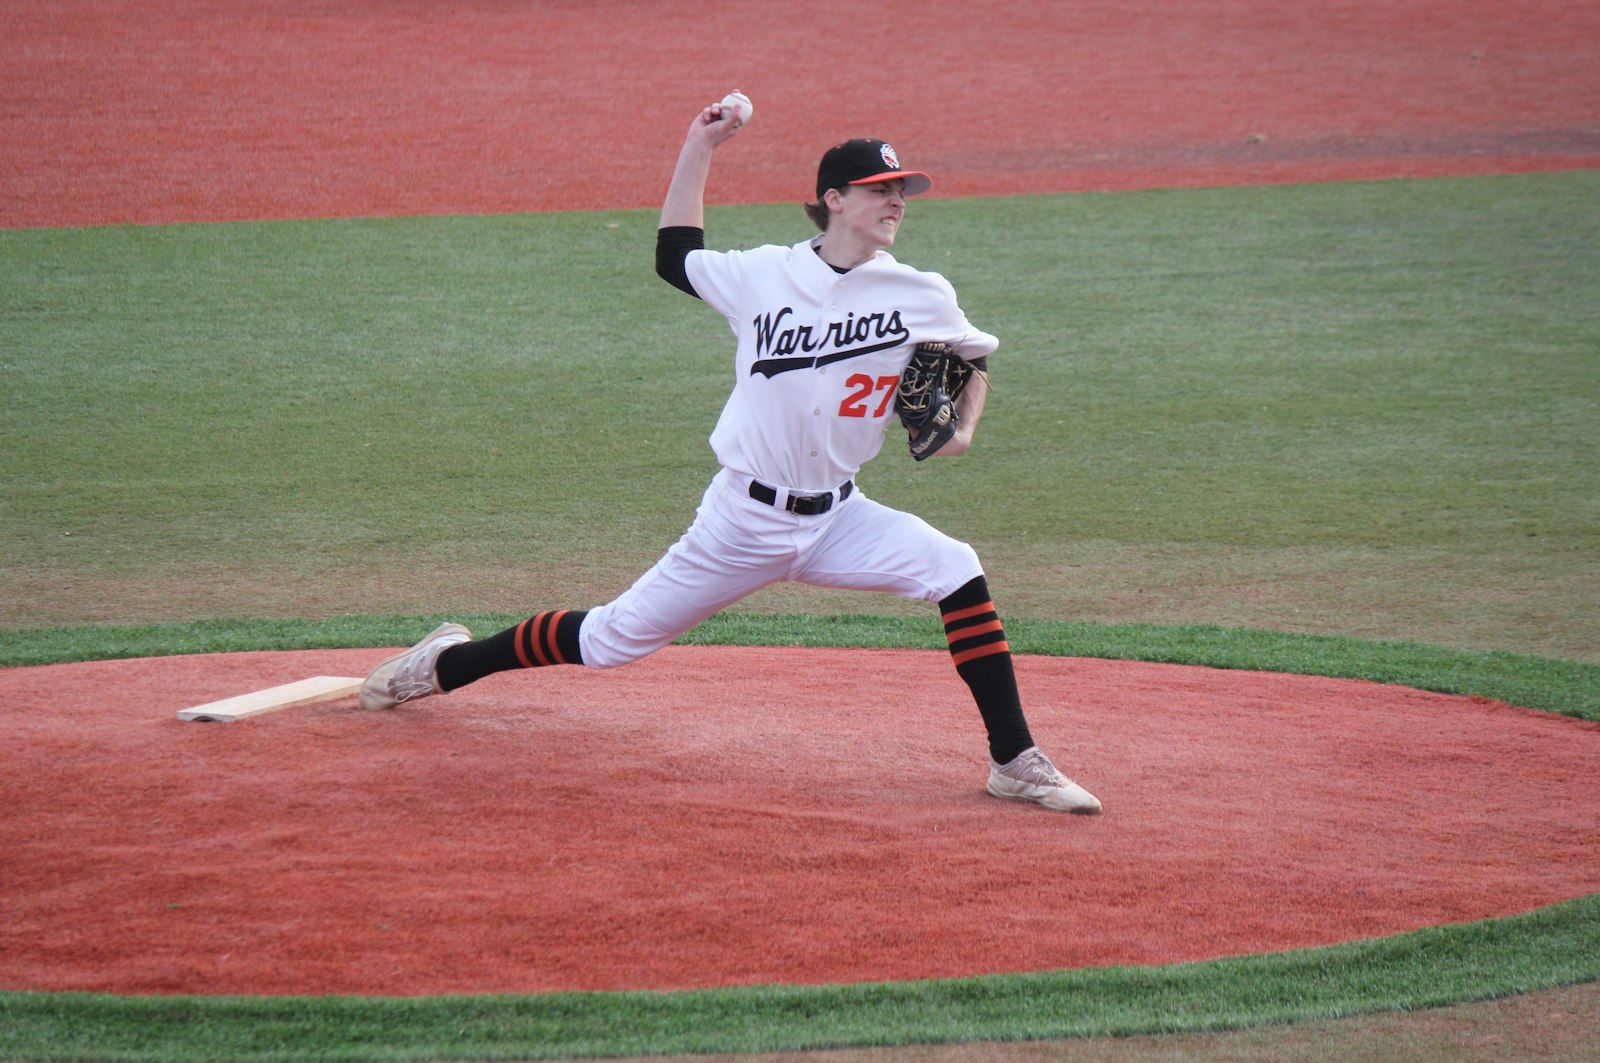 Senior Wyatt Ruppenthal, who pitched the first three innings in Monday’s victory over Detroit Western, has also been Brother Rice’s leading hitter early in the season.